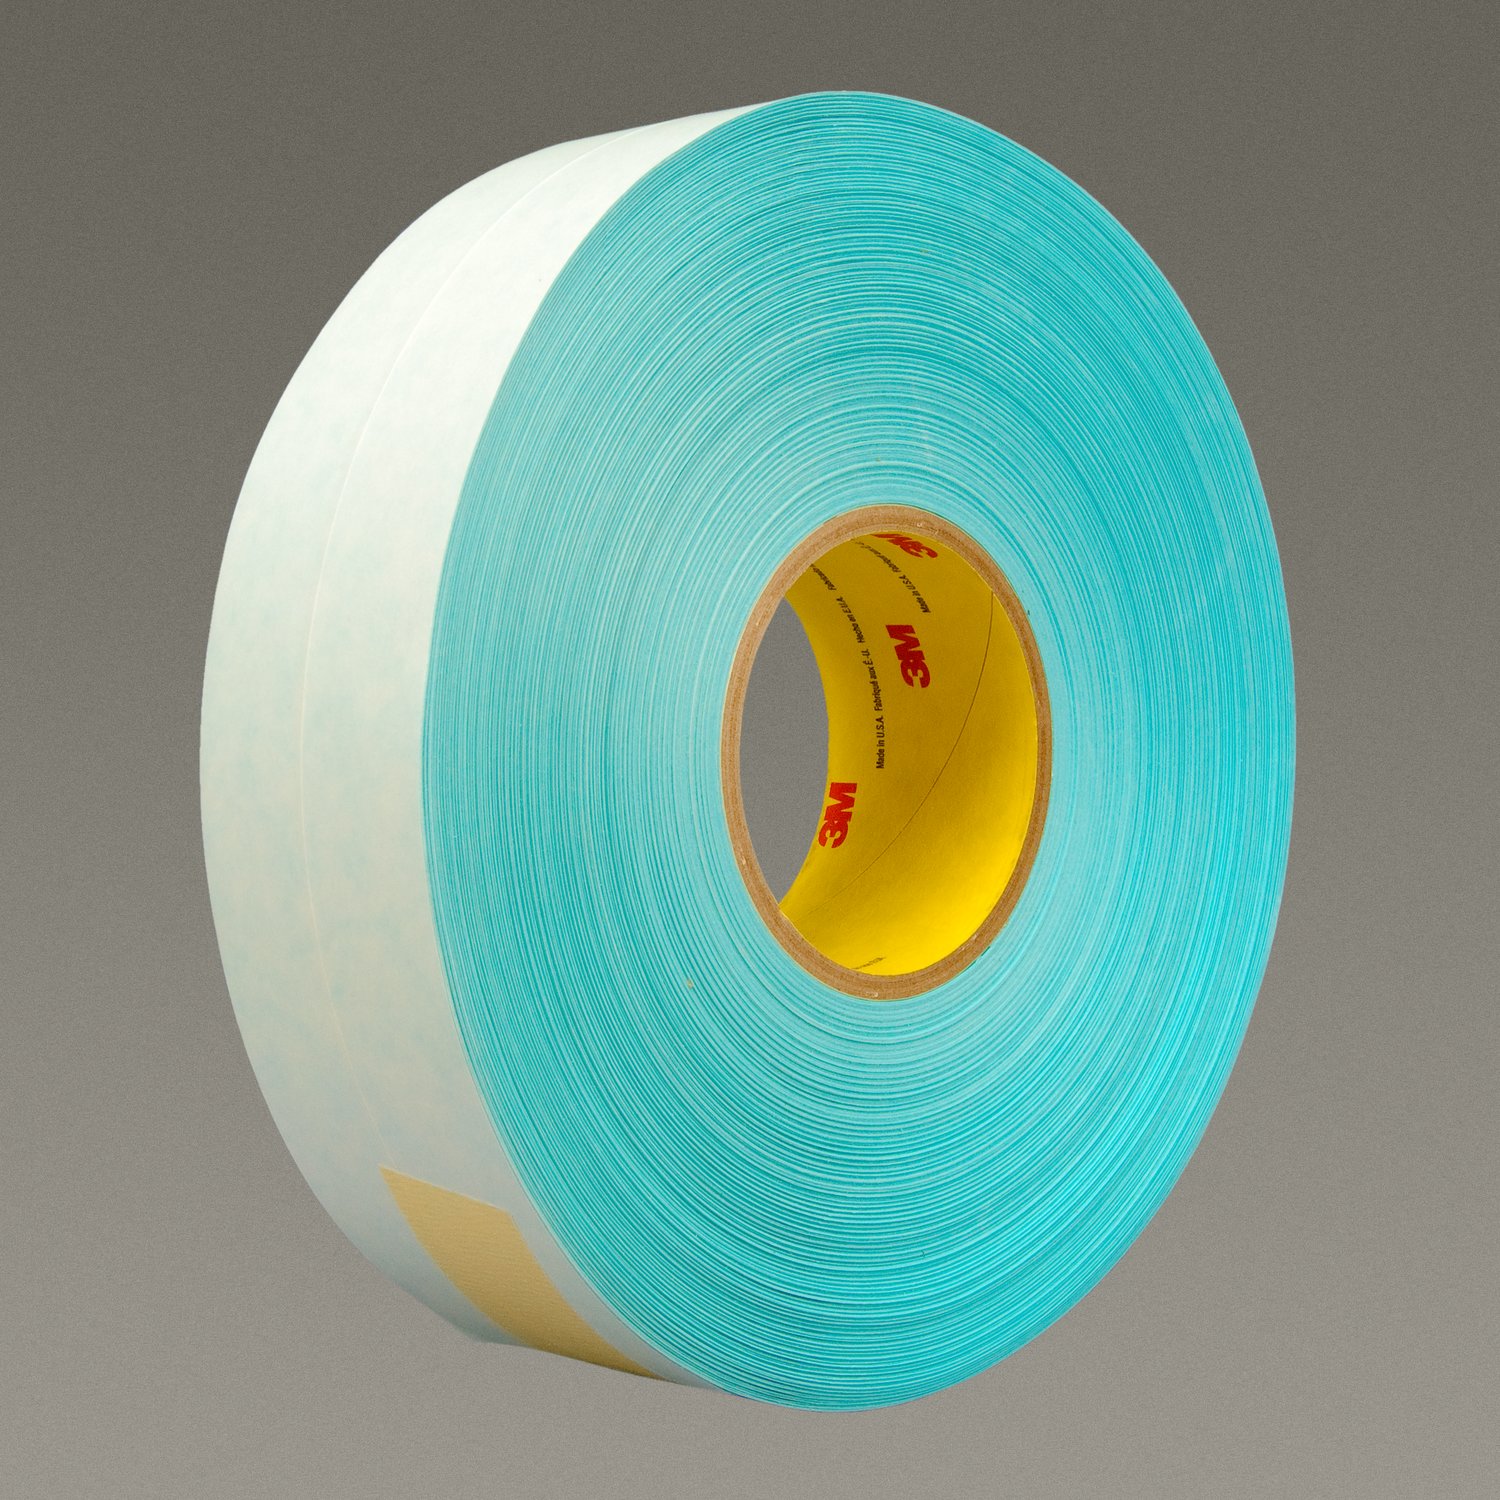 7100027358 - 3M Printable Repulpable Single Coated Splicing Tape 9103, Blue, 72 mm x
55 m, 4.1 mil, 12 rolls per case